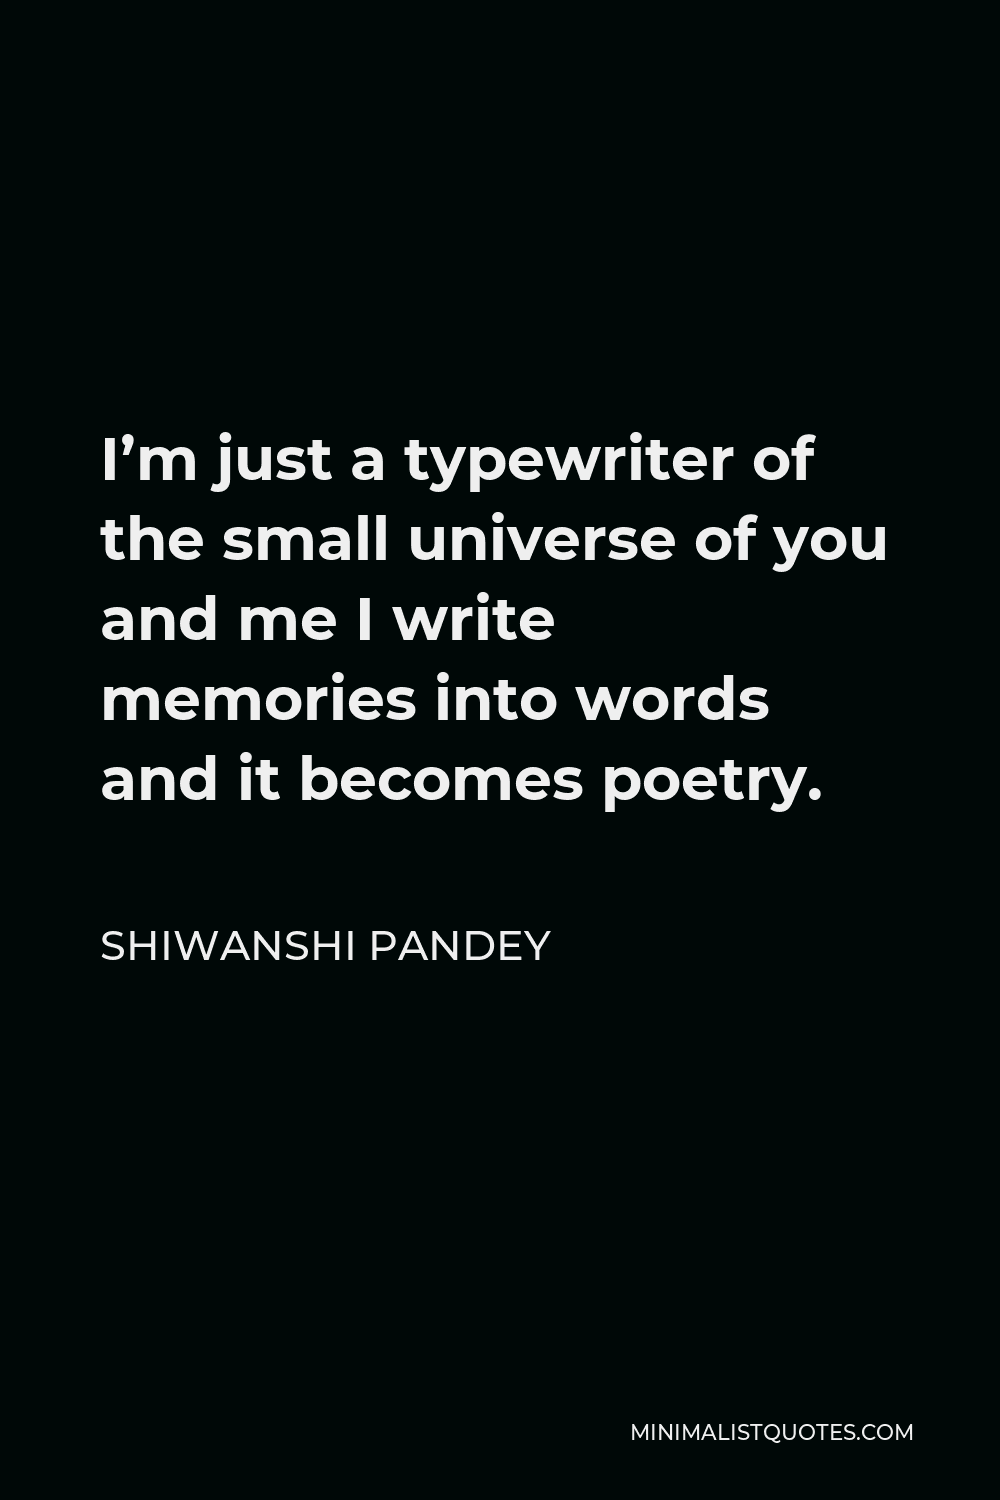 Shiwanshi Pandey Quote - I’m just a typewriter of the small universe of you and me I write memories into words and it becomes poetry.